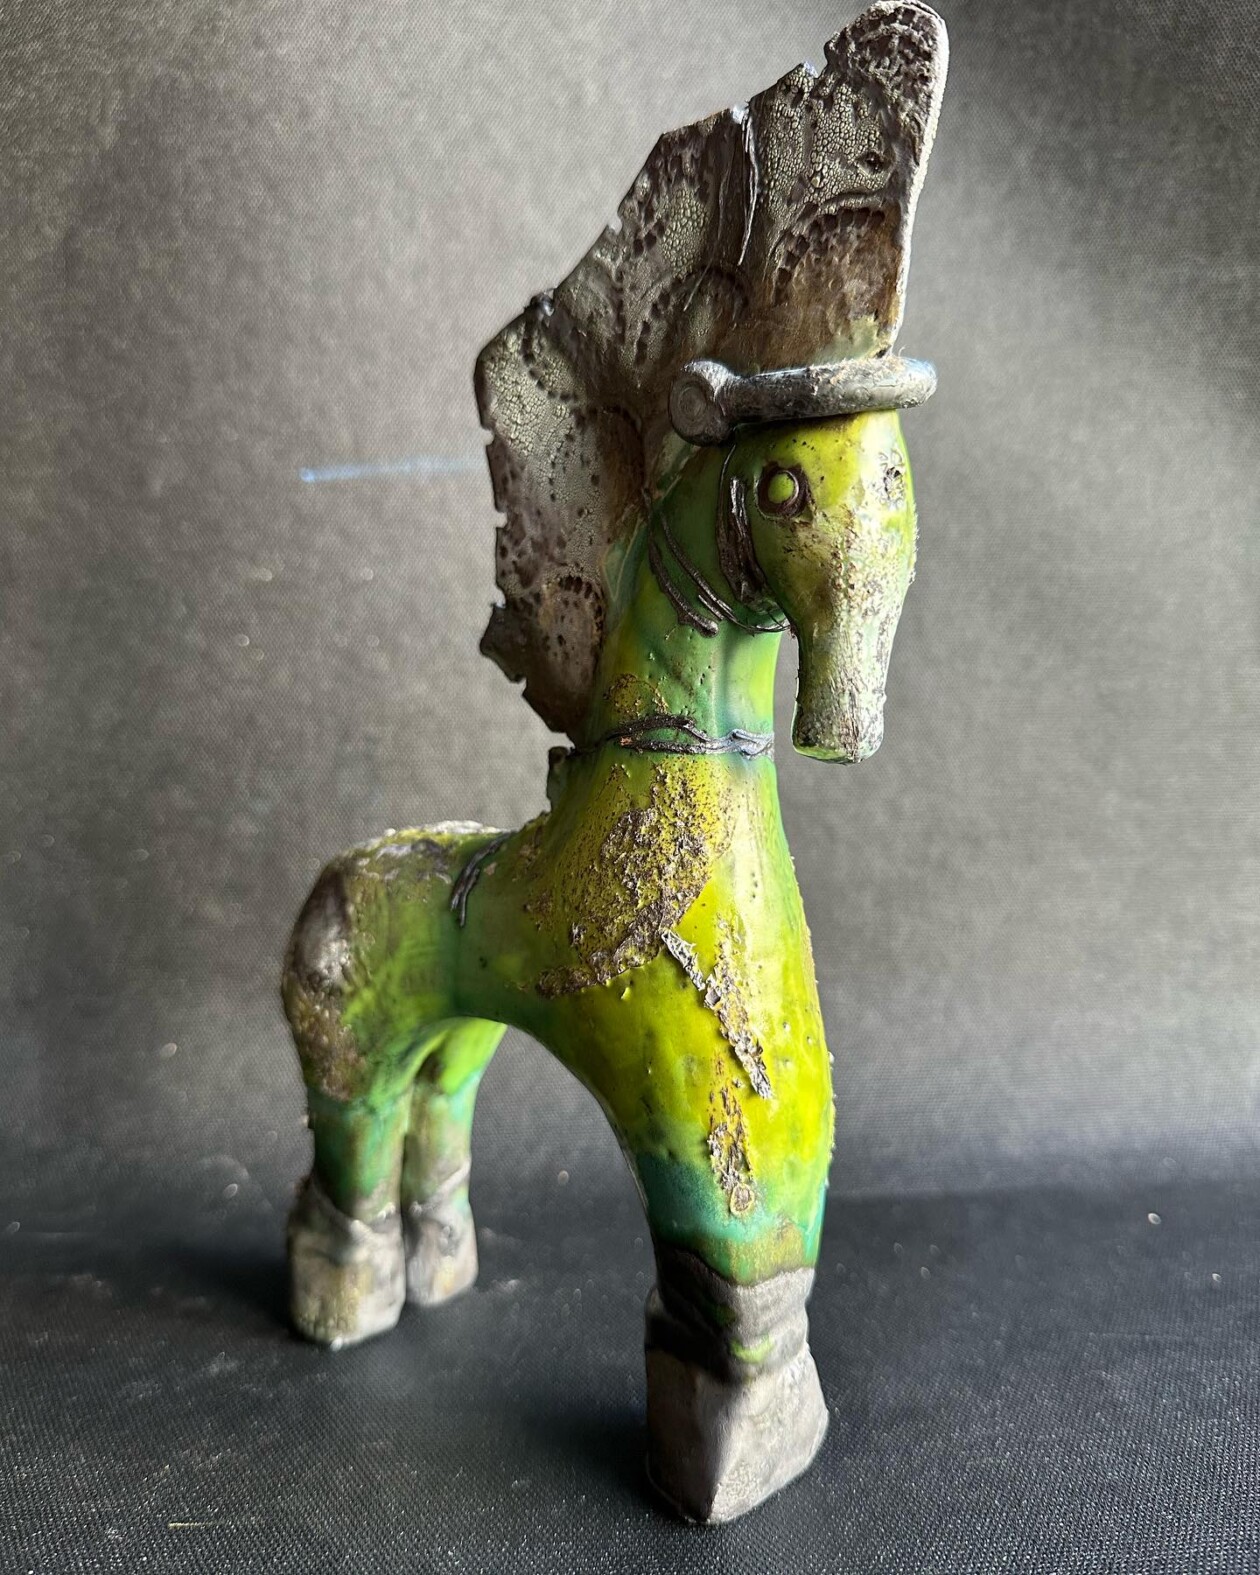 Fascinating Animal Ceramic Sculptures That Look Like Ancient Artifacts By Gul Sahin (4)